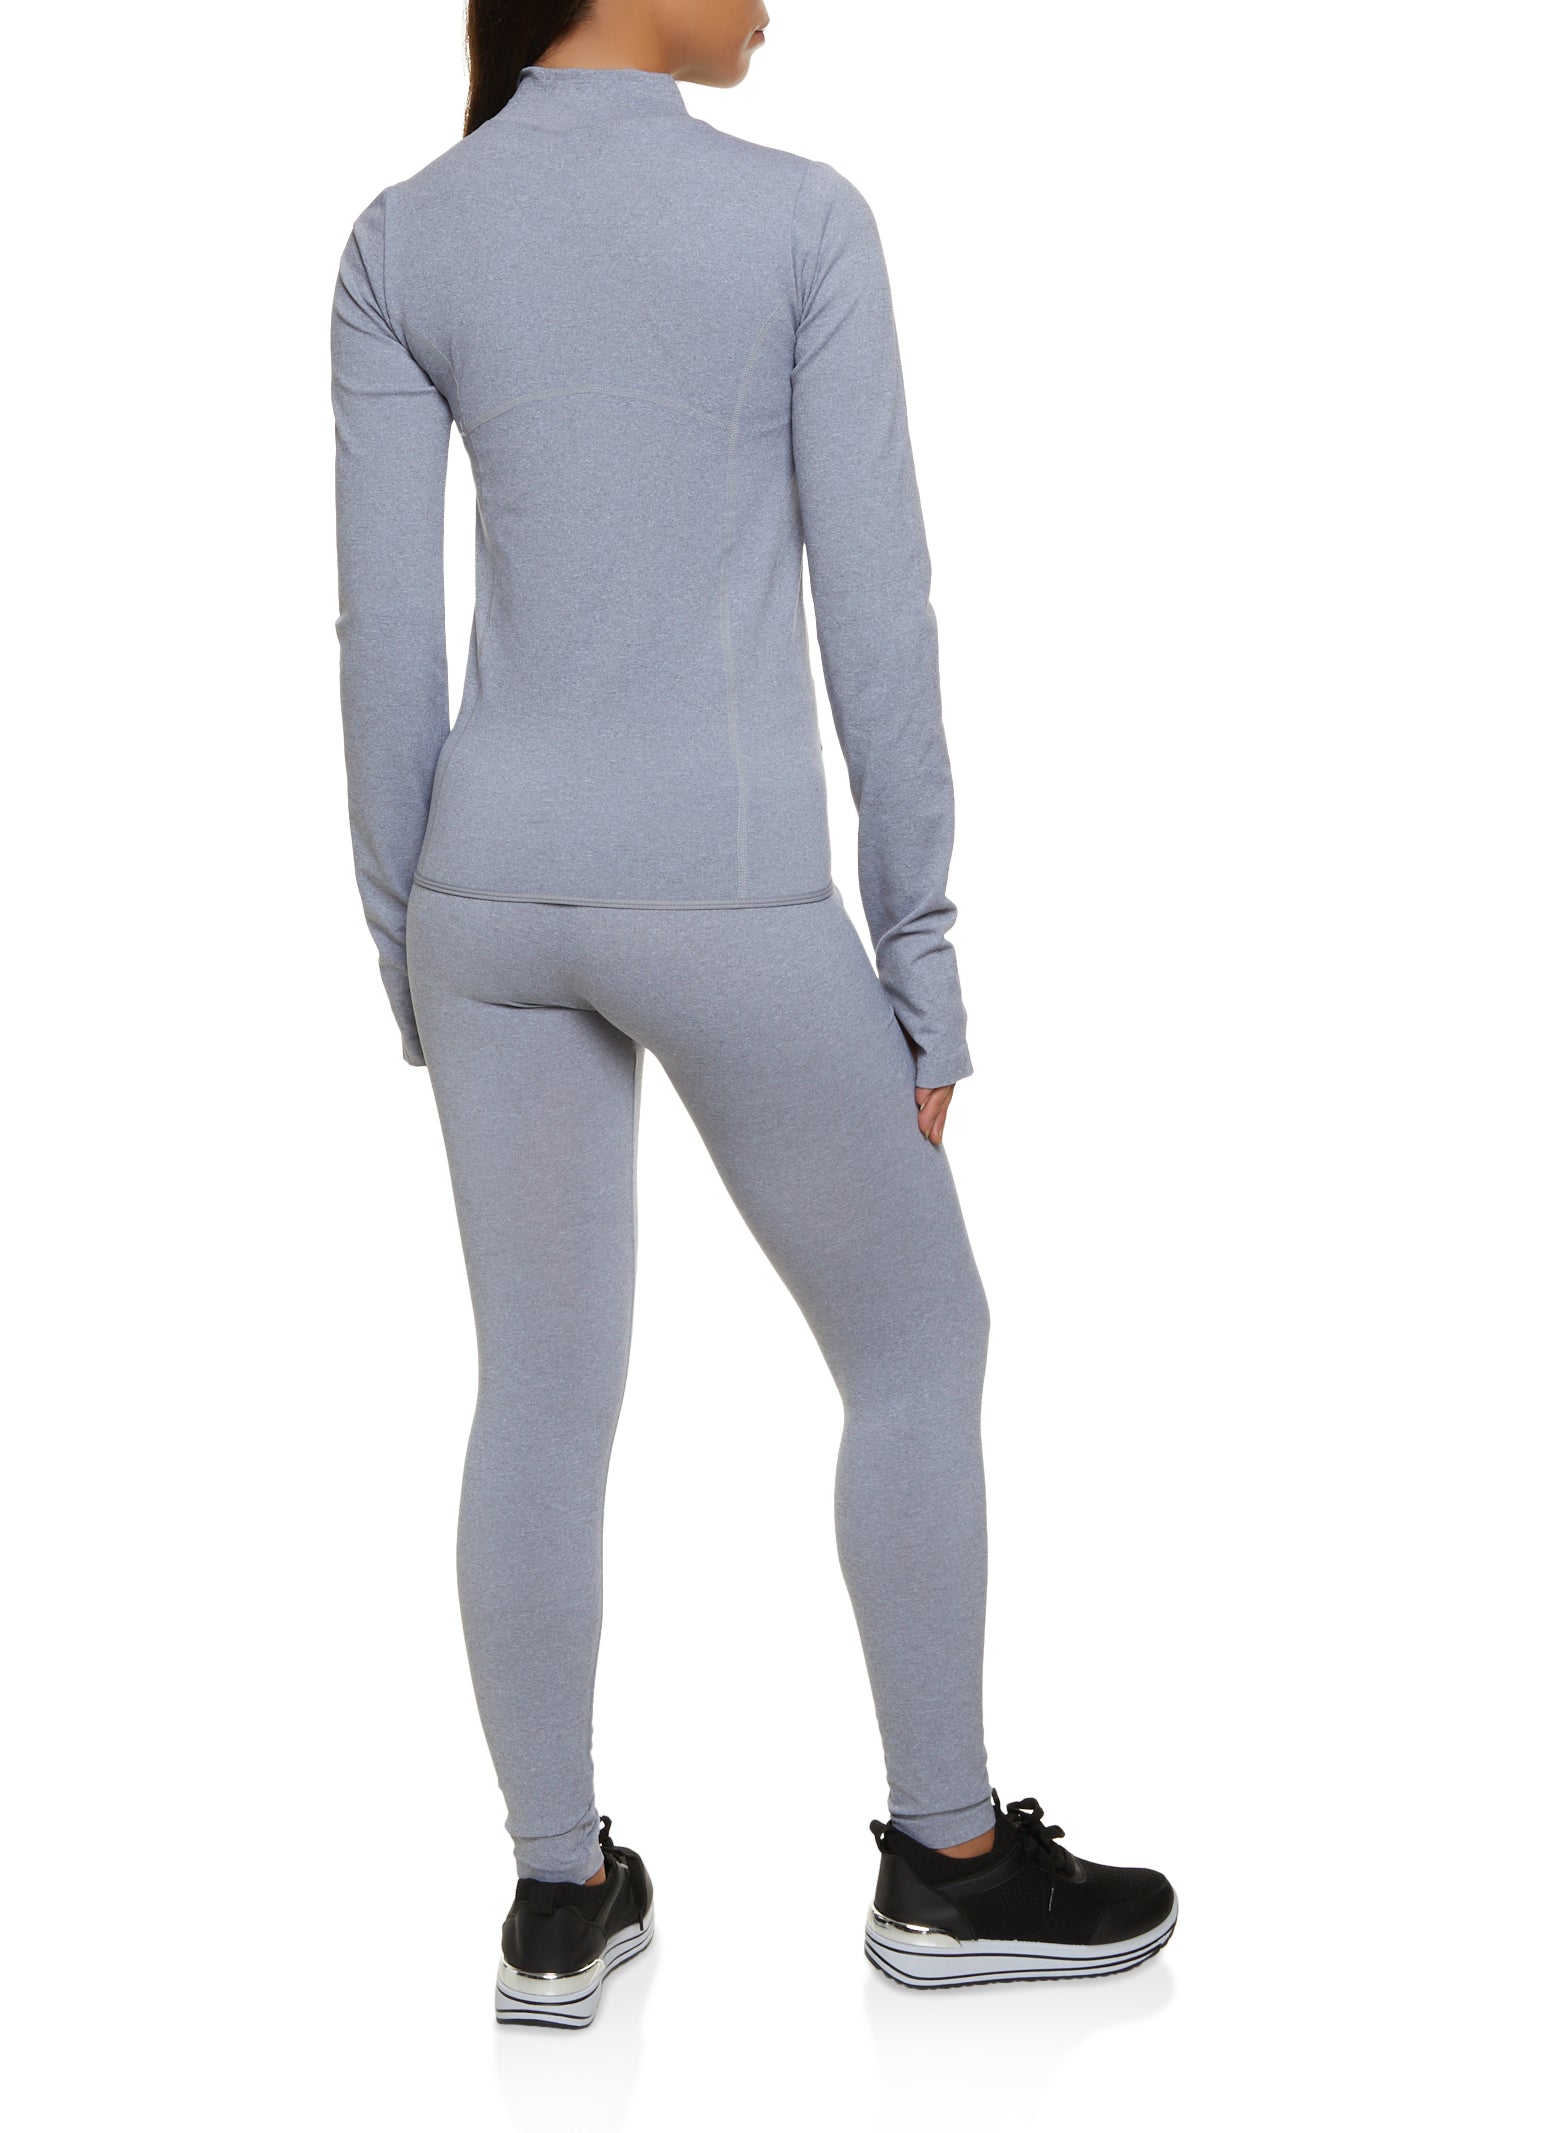 Seamless Solid Track Jacket and Leggings Set - Heather